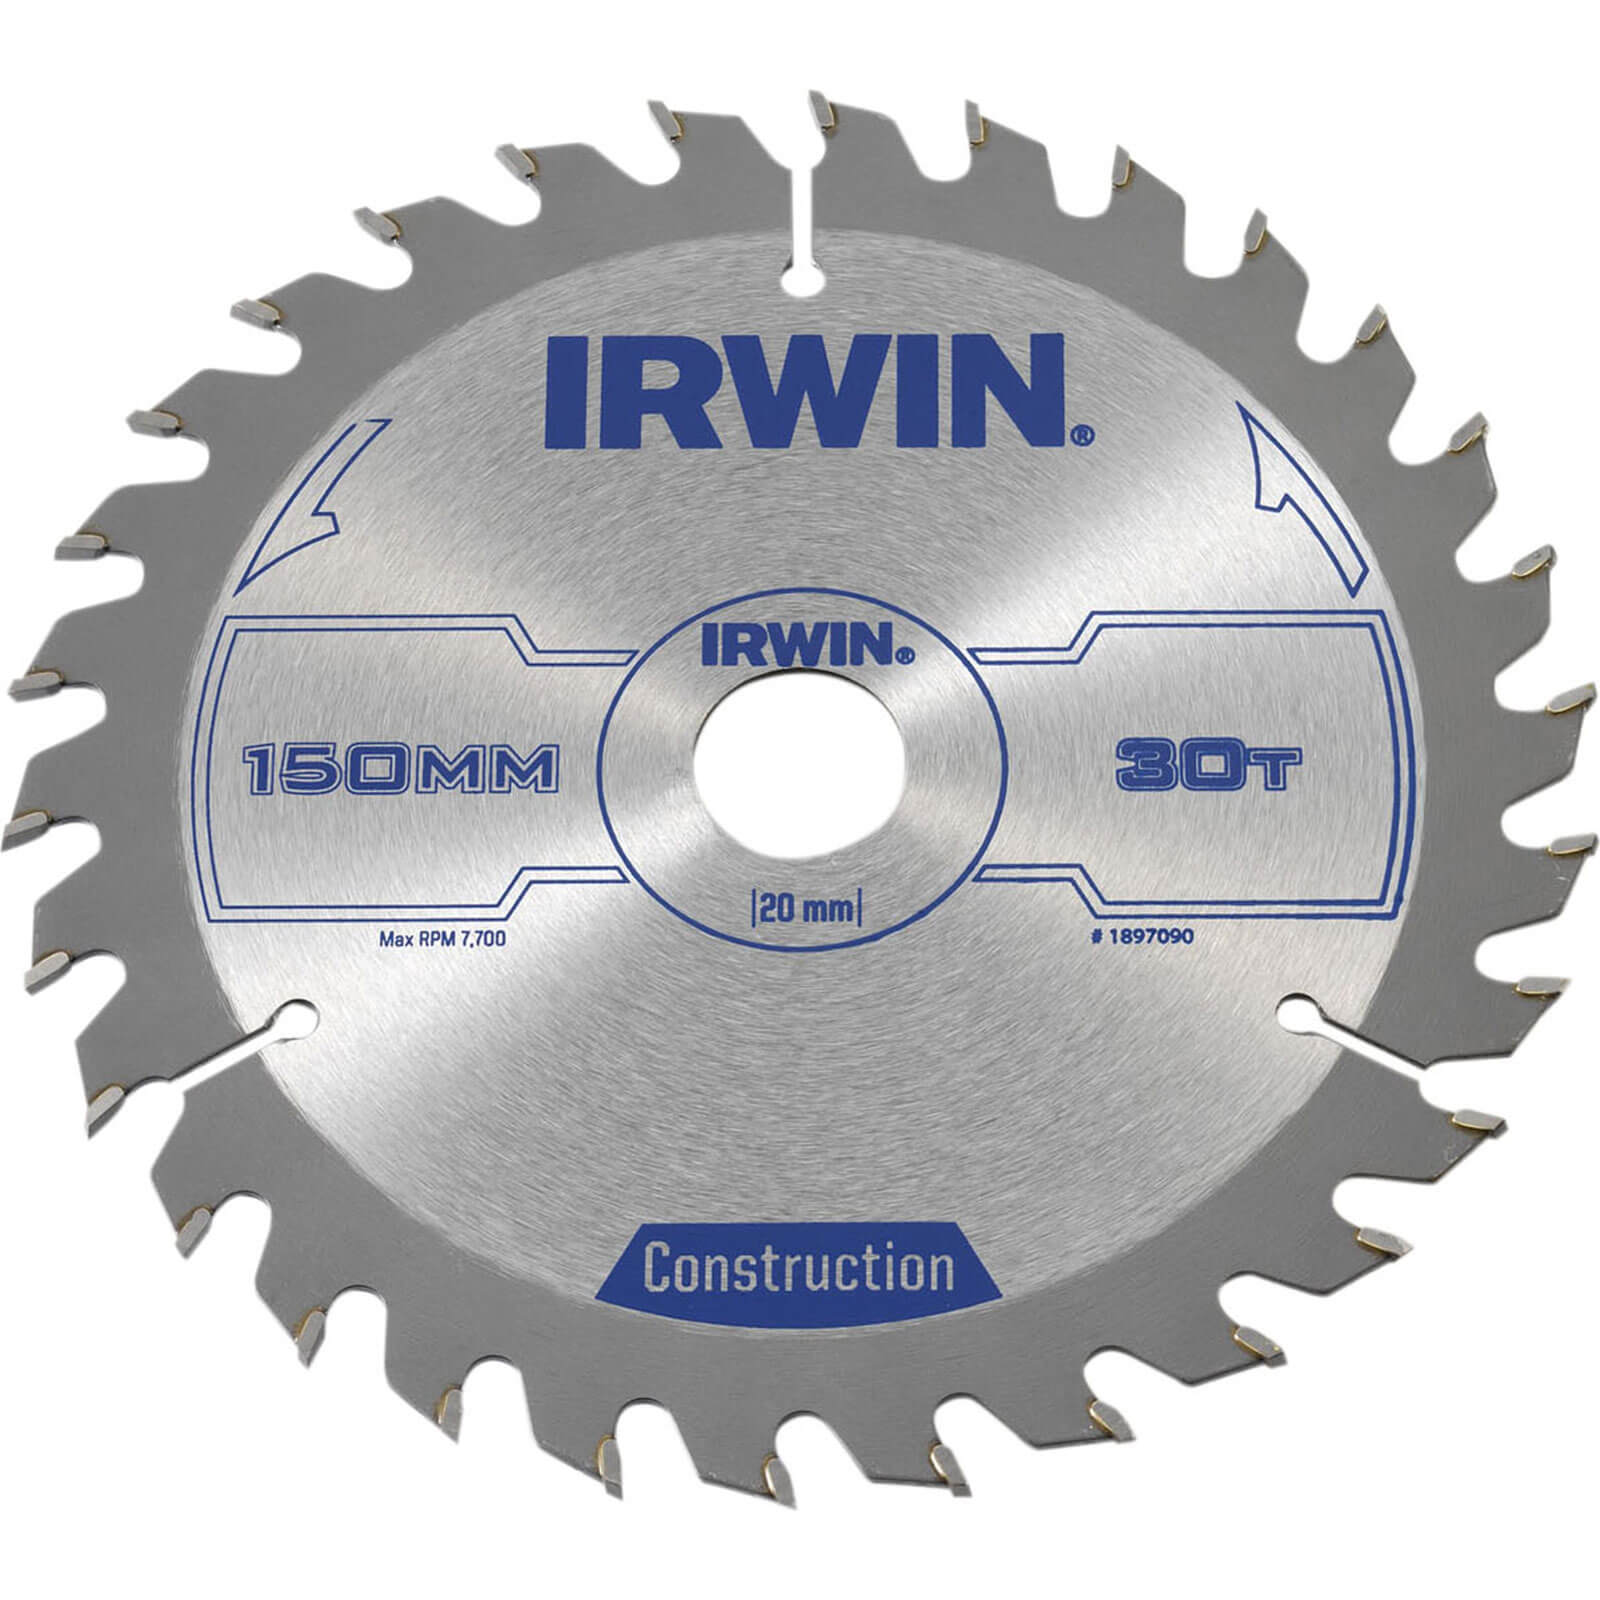 Photo of Irwin Atb Construction Circular Saw Blade 150mm 30t 20mm